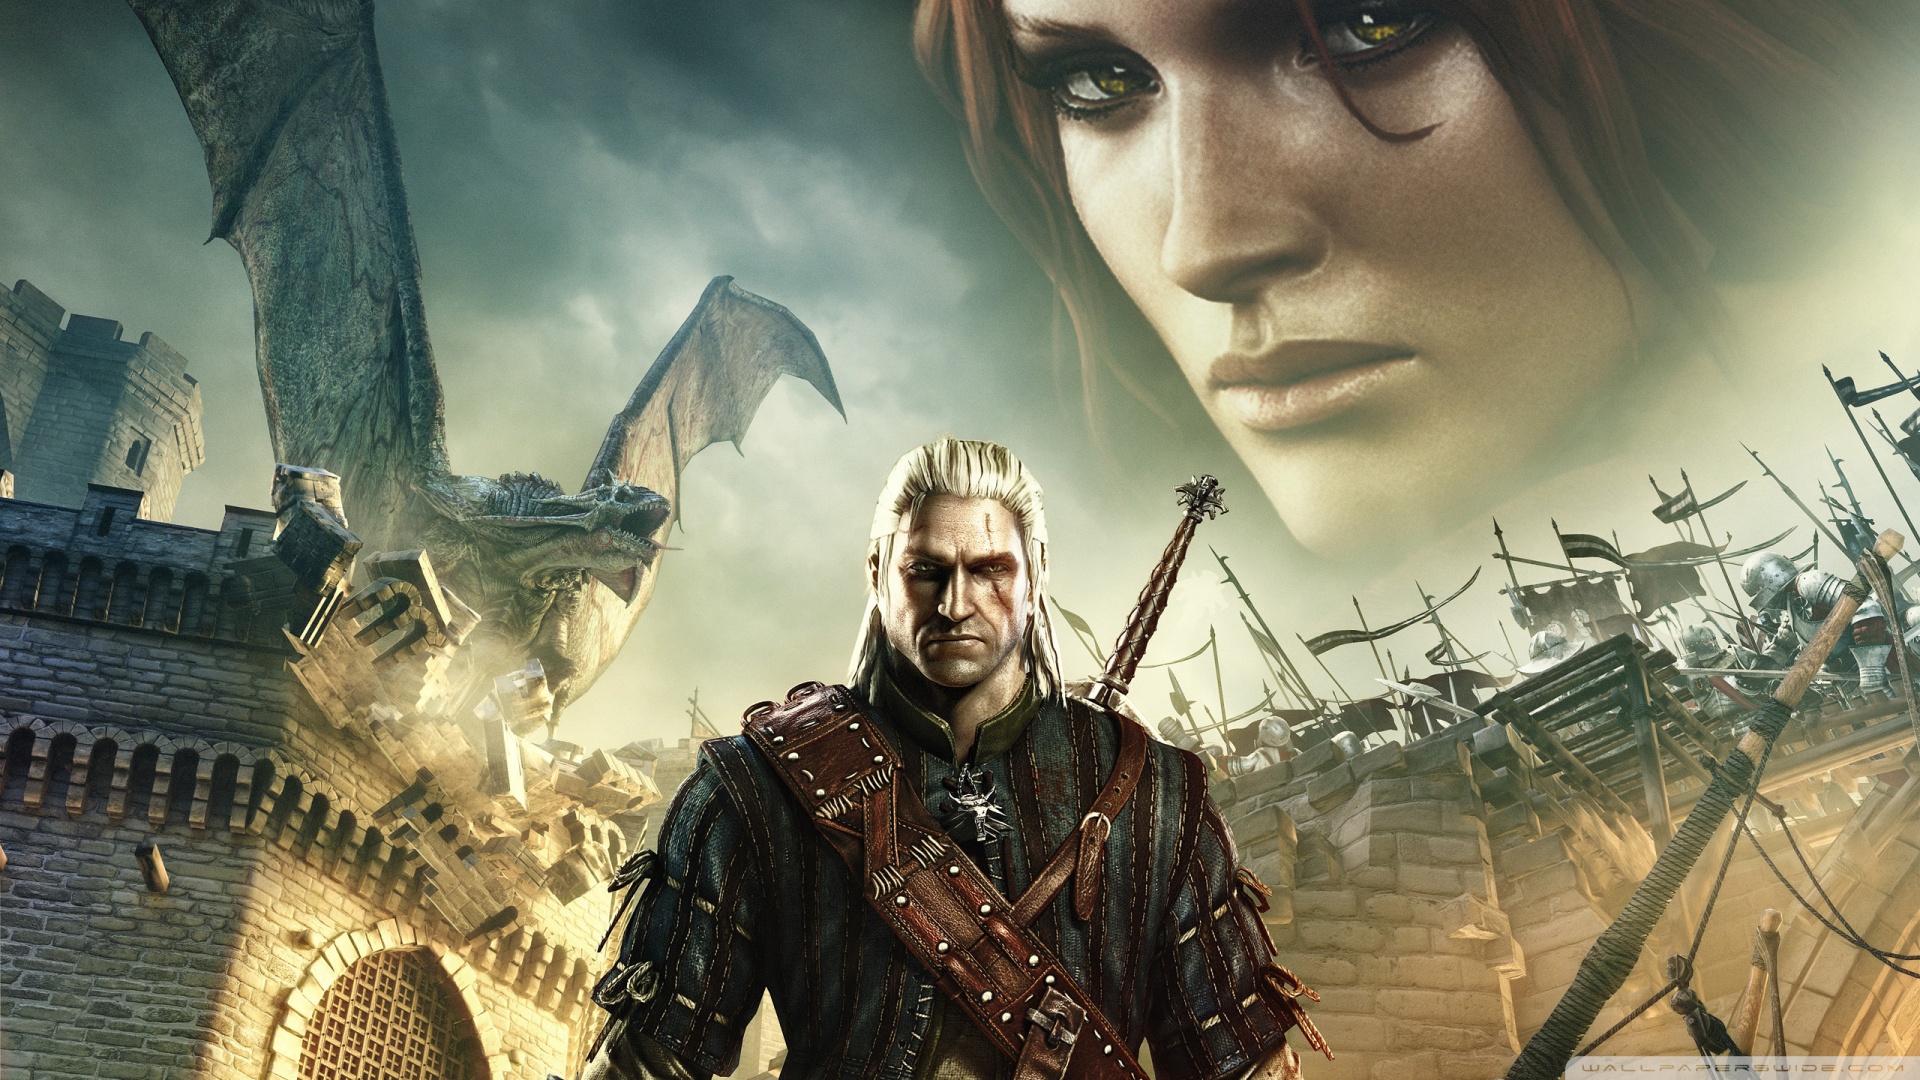 The Witcher 2 Assassins Of Kings Wallpaper 1920x1080 The Witcher 2 1920x1080